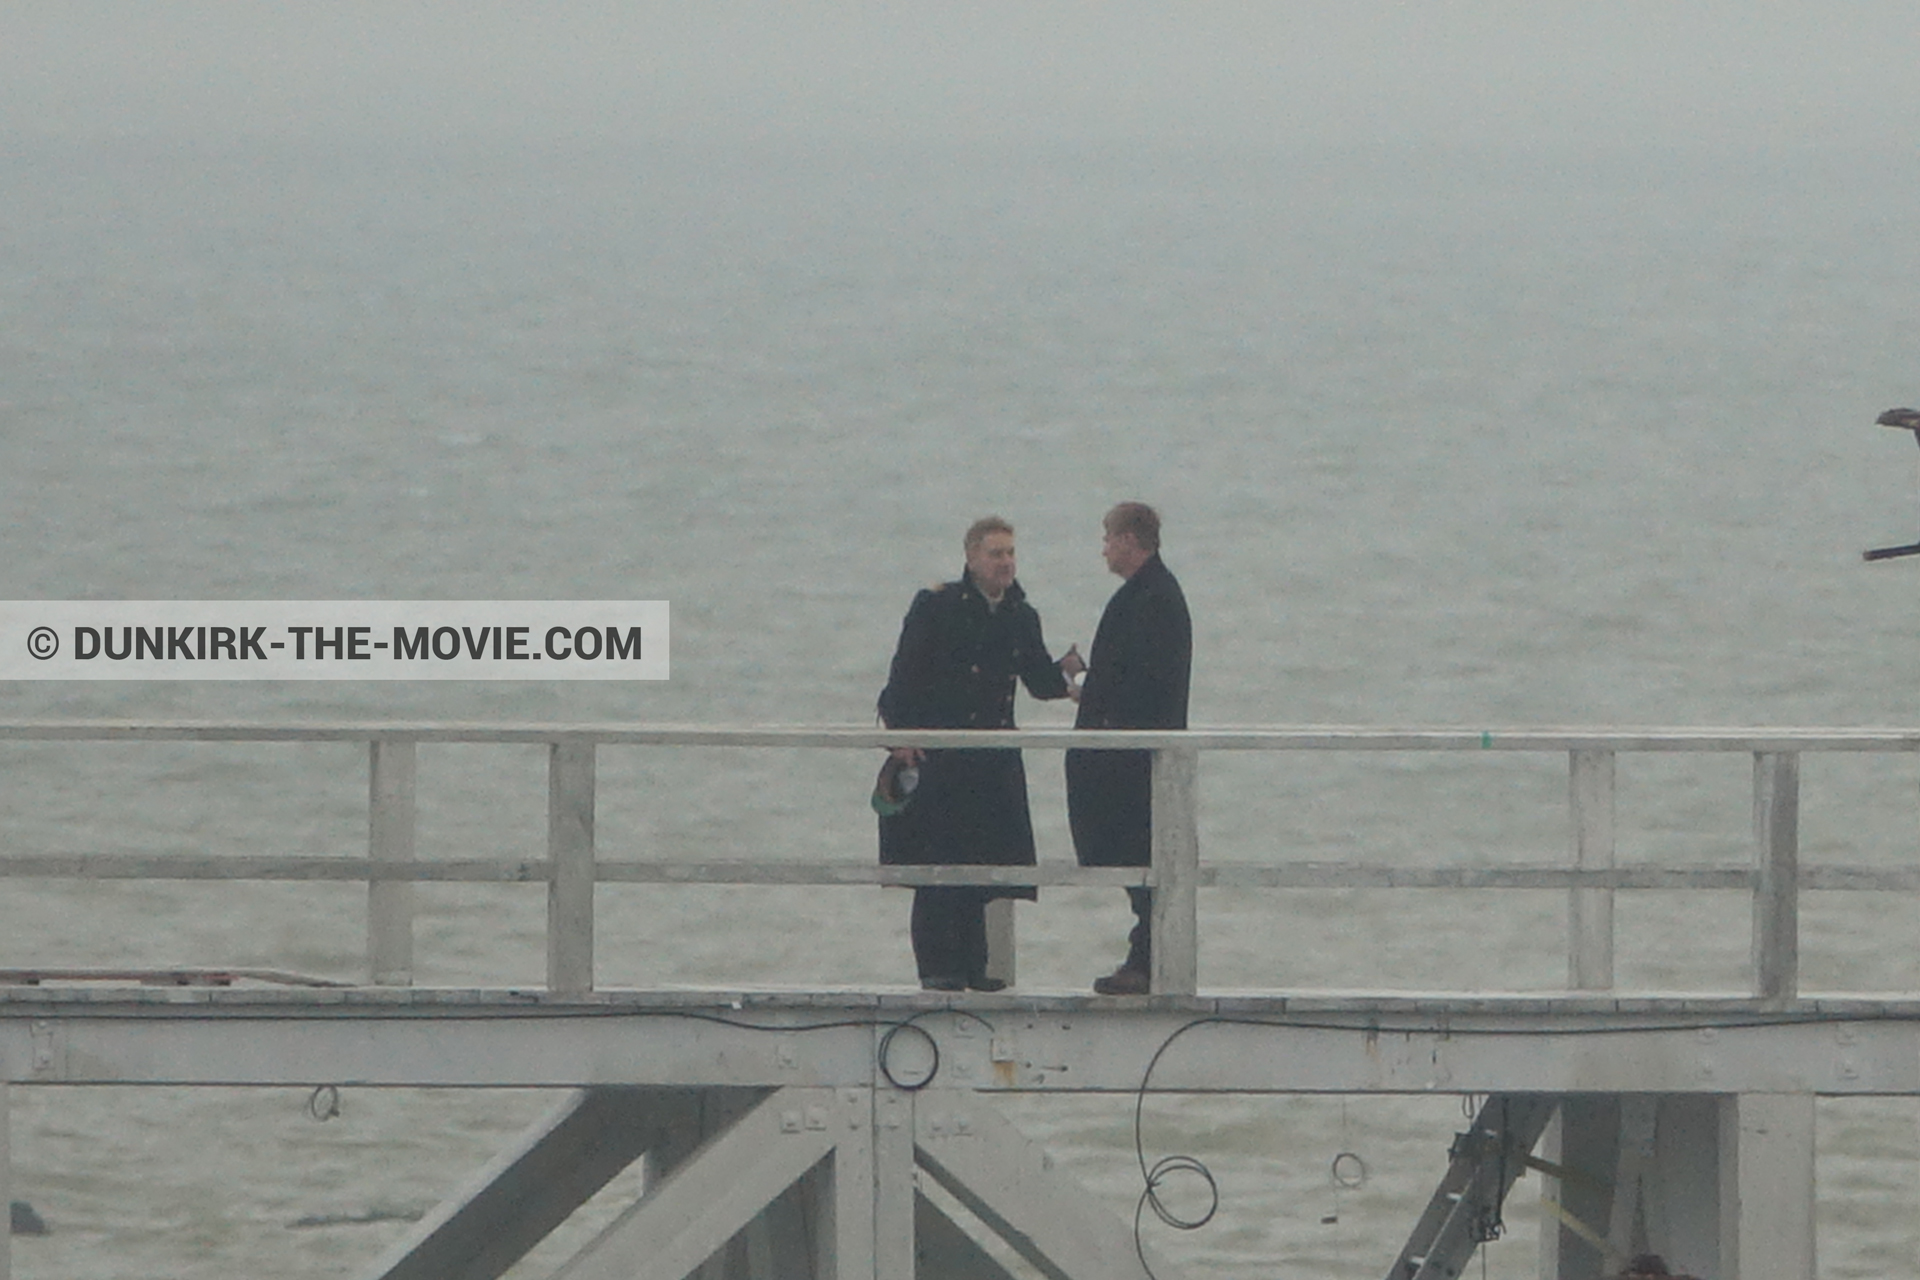 Picture with EST pier, Kenneth Branagh, Christopher Nolan,  from behind the scene of the Dunkirk movie by Nolan